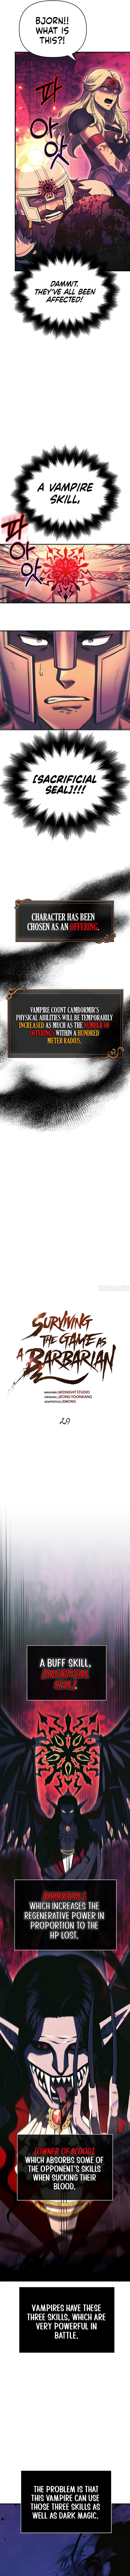 surviving-the-game-as-a-barbarian-chap-29-6